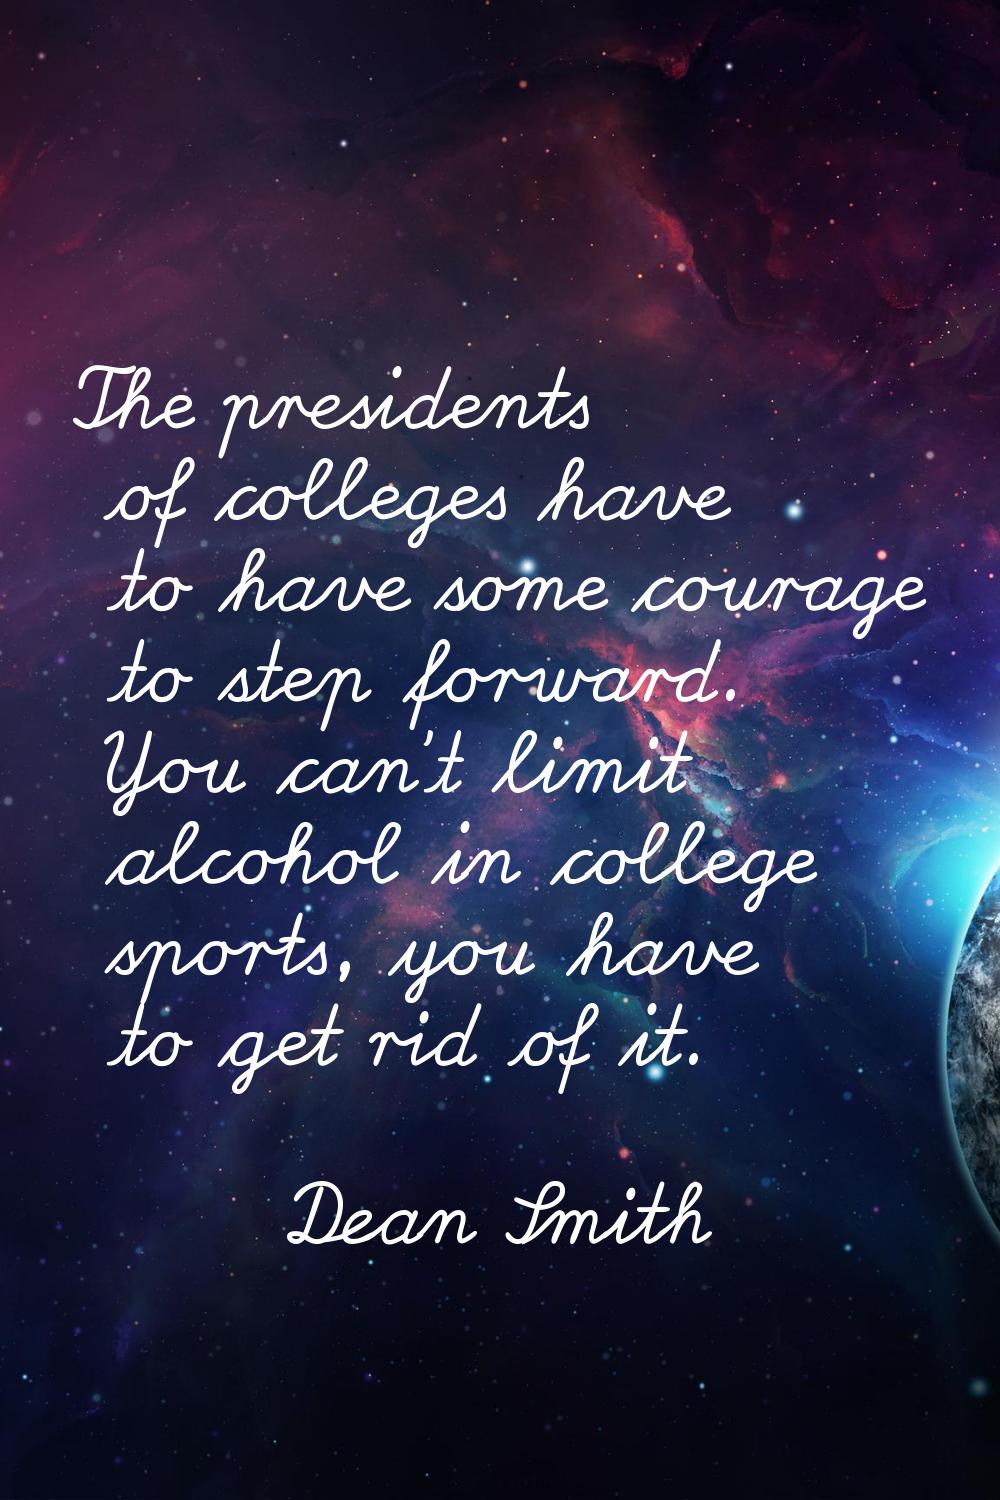 The presidents of colleges have to have some courage to step forward. You can't limit alcohol in co